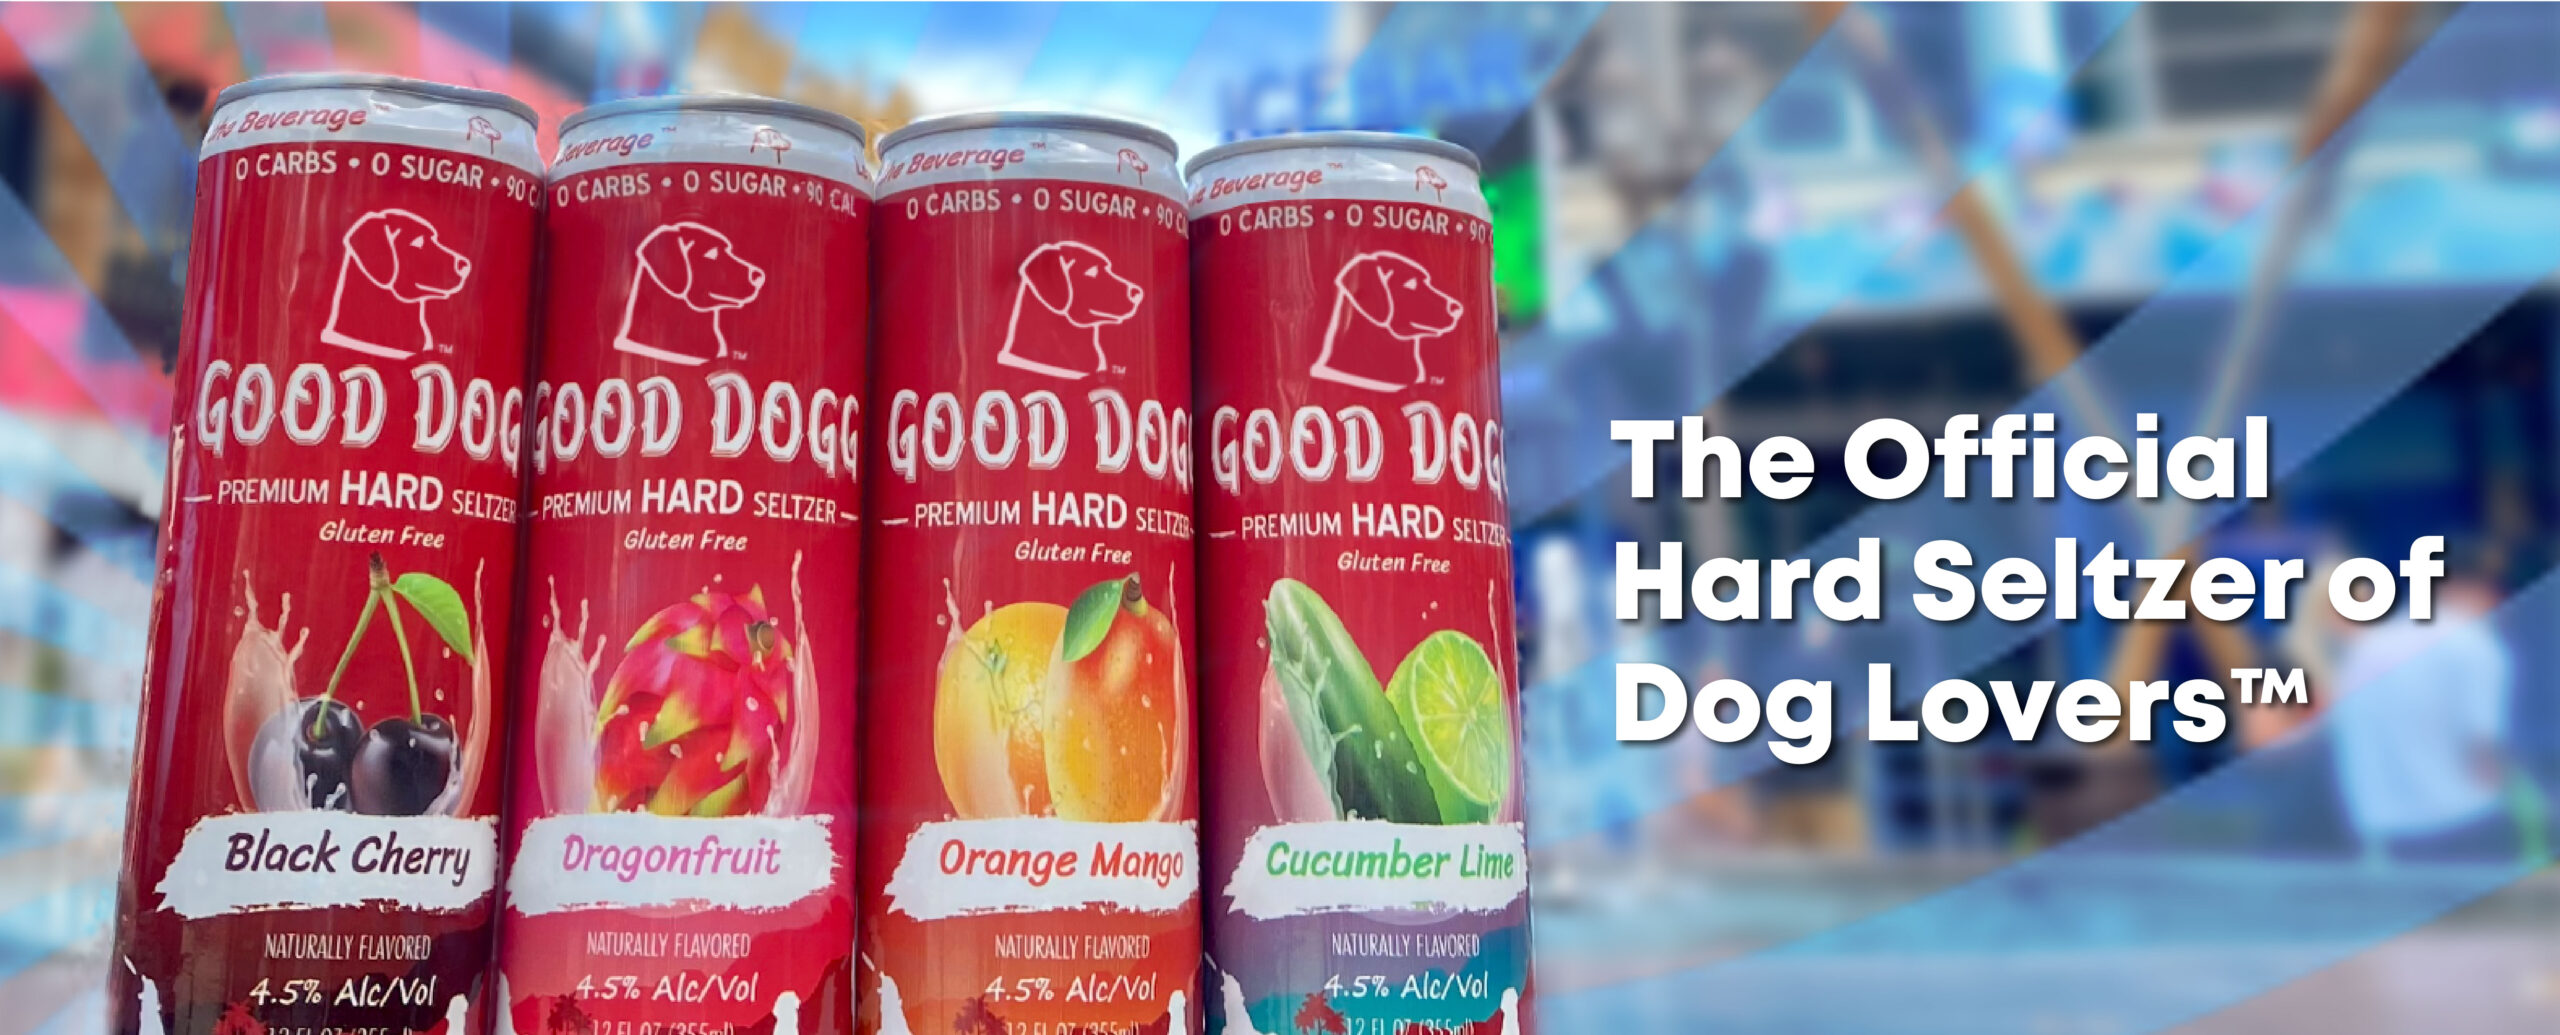 A picture of four can flavors: Orange Mango, Black Cherry, Cucumber Lime, and Dragonfruit. The picture is titled The Official Hard Selzer of Dog Lovers